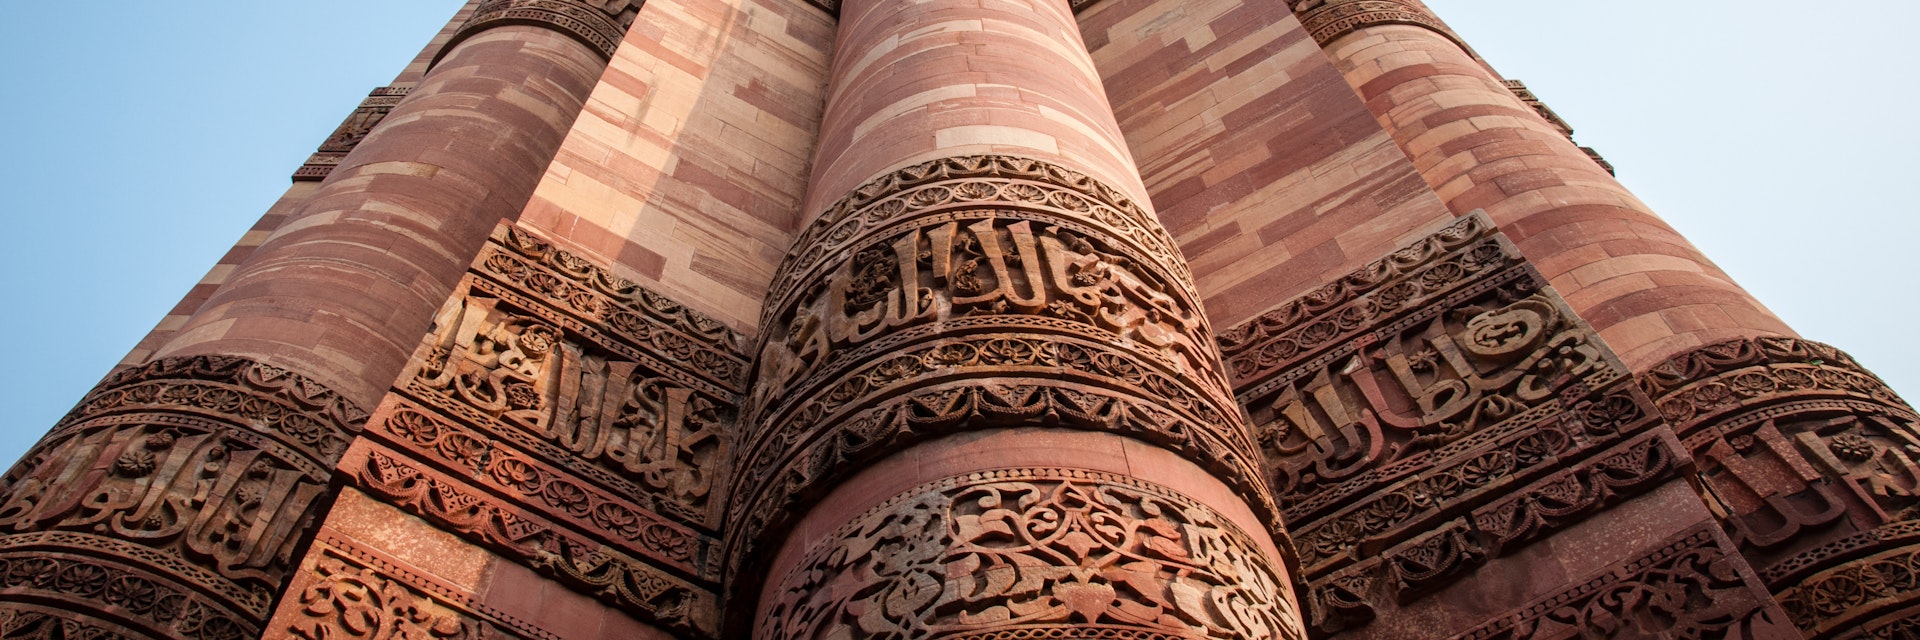 This is a photo of Qutub Minar, showing the intricate engraving and carvings done. The photo instills a sense of strength and poise.